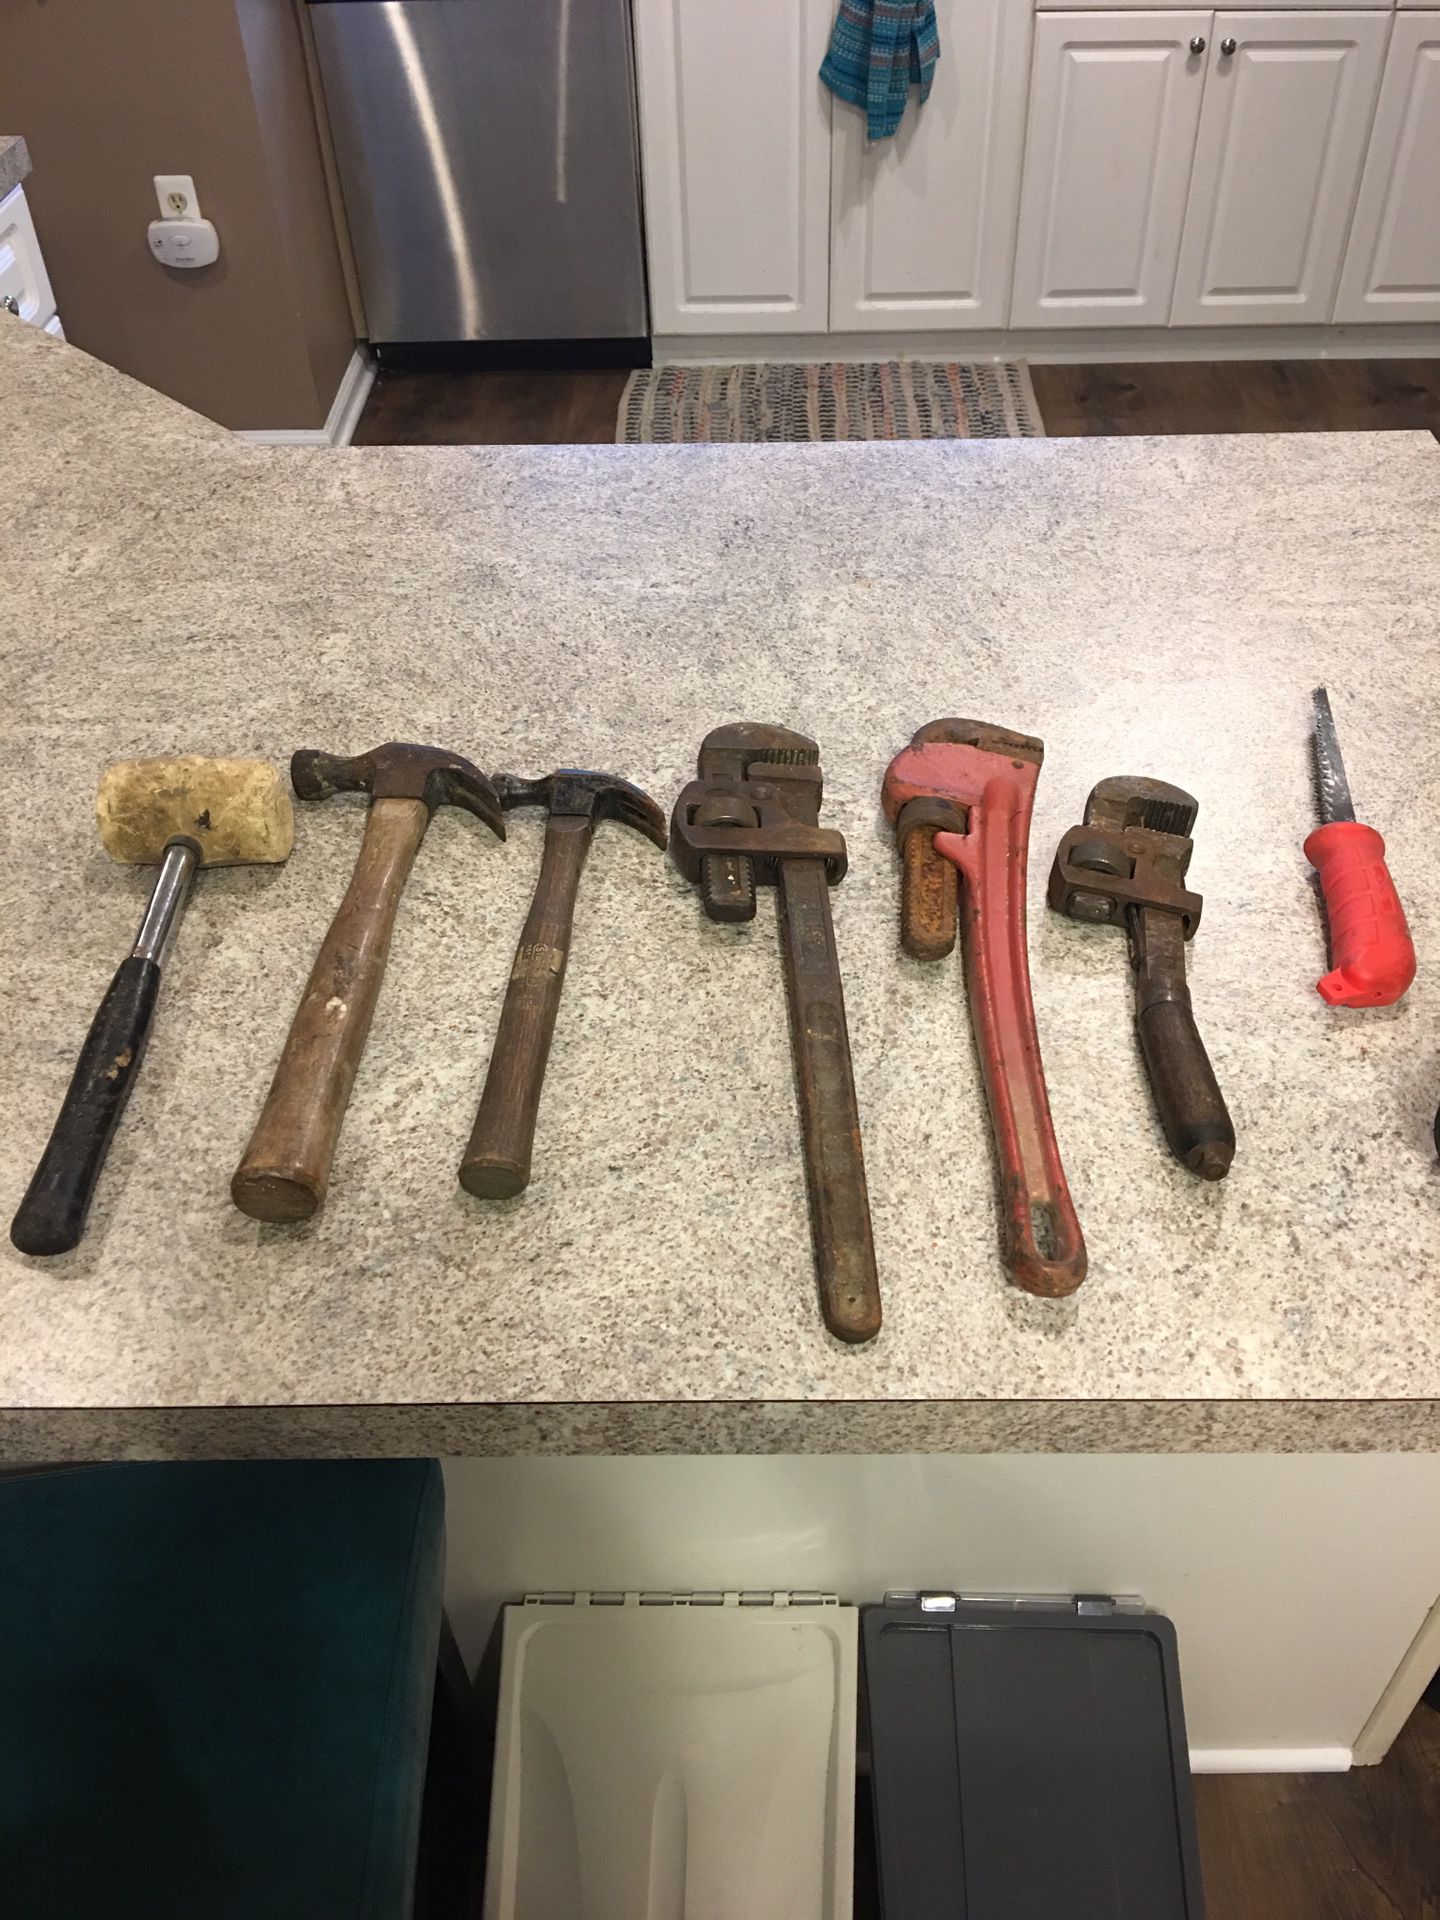 Hammer, wrenches and dry wall saw